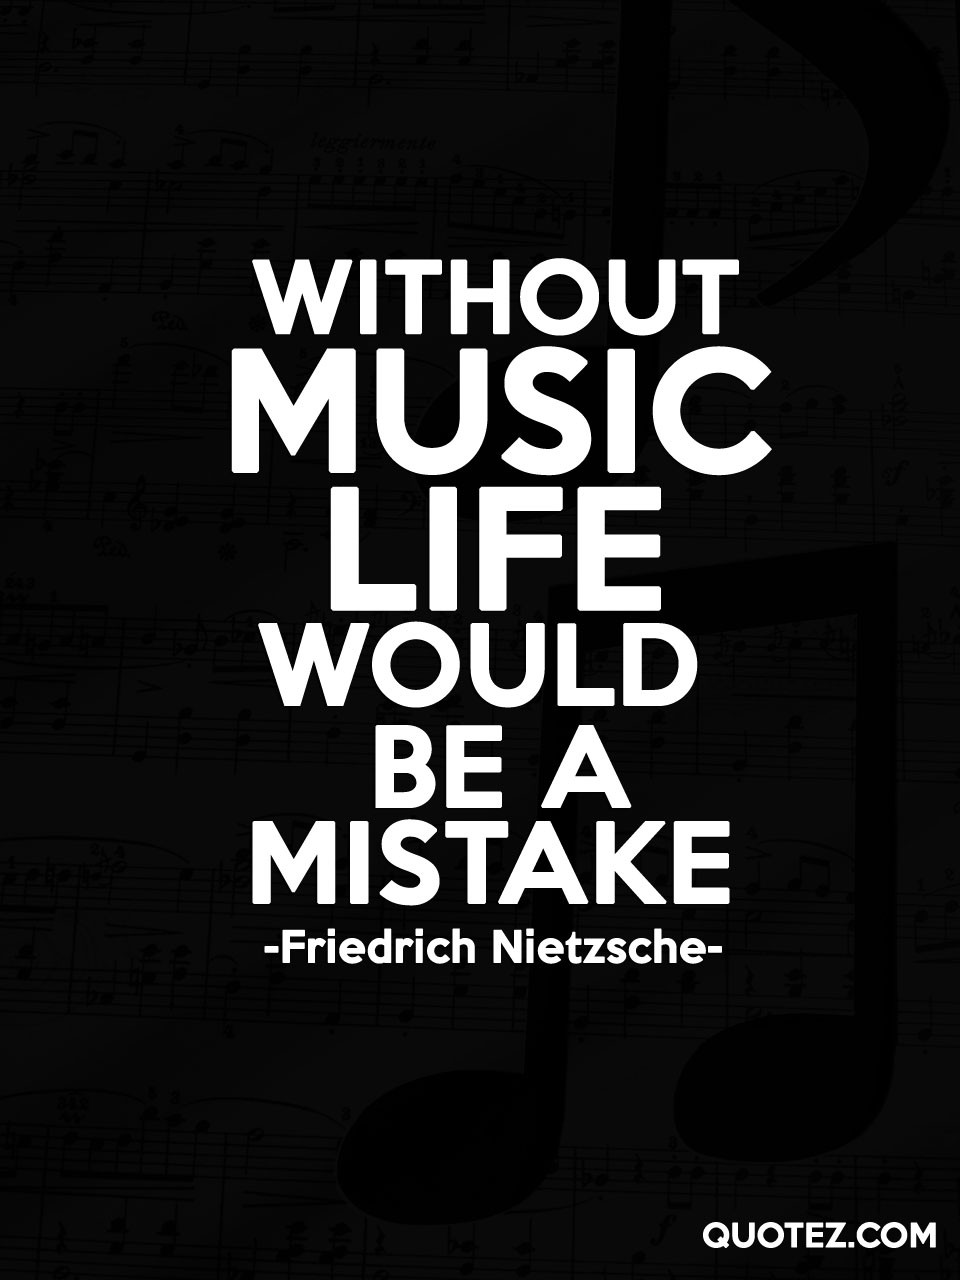 Music And Life Quotes
 Famous Quotes About Life Music QuotesGram